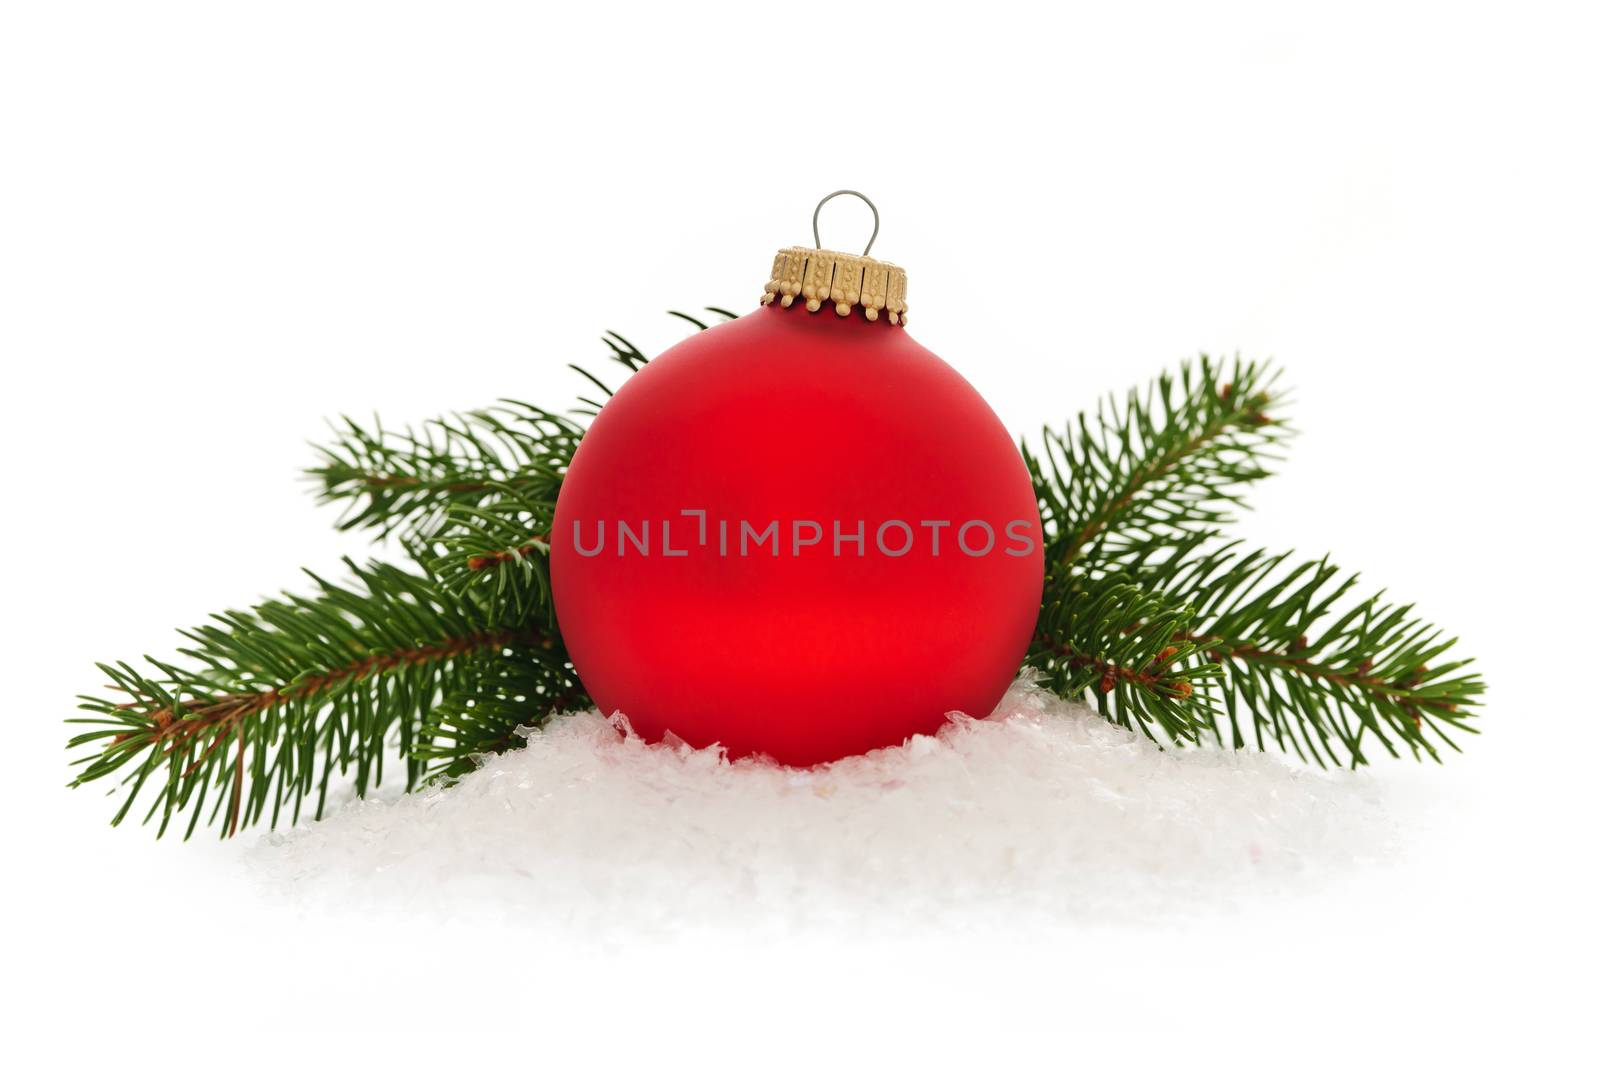 Red christmas ball with spruce tree branch isolated on white background